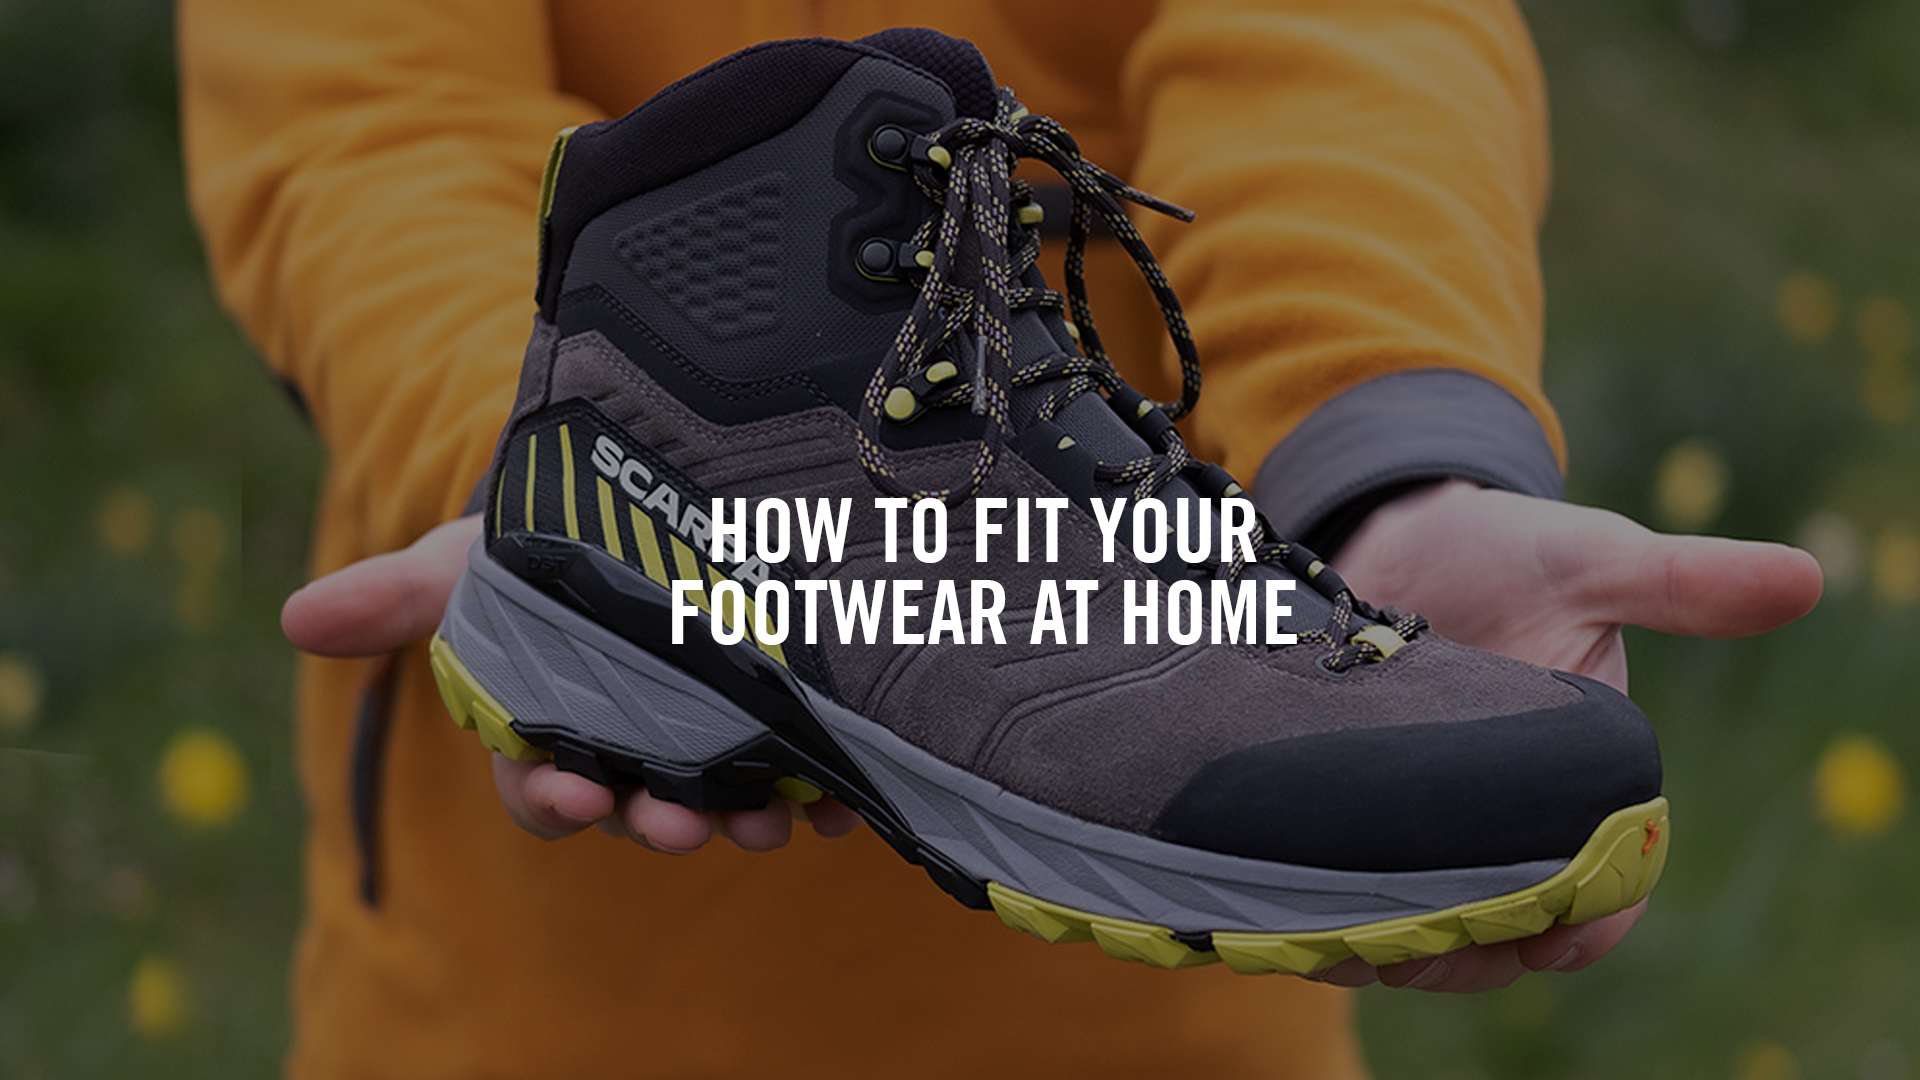 How to Fit Your Footwear at Home